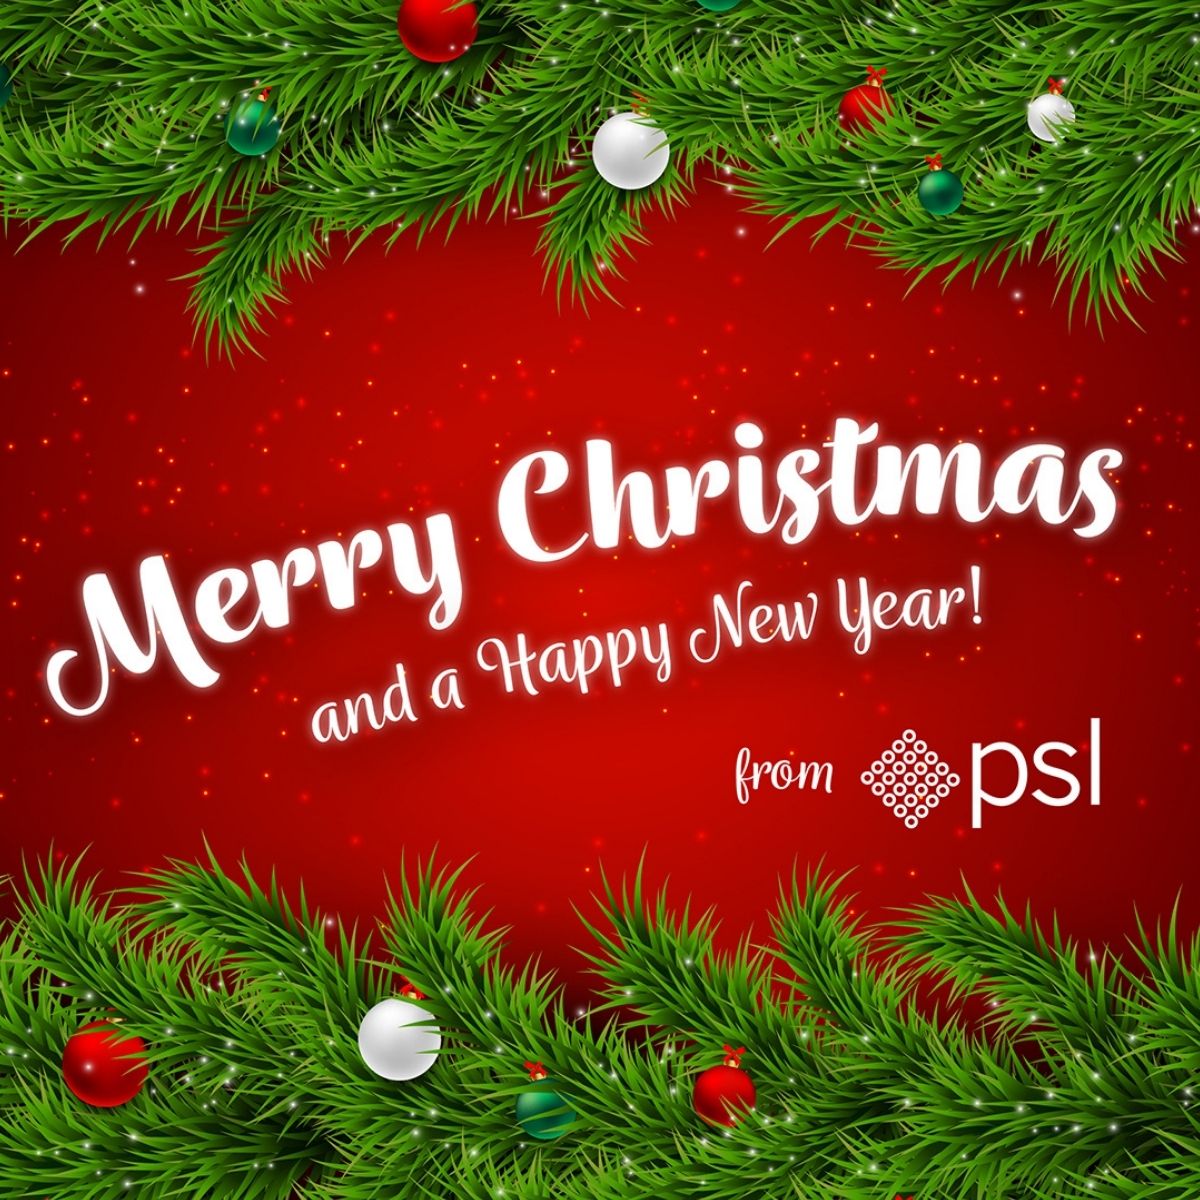 Happy Christmas 2021 from all at Powder Systems Limited